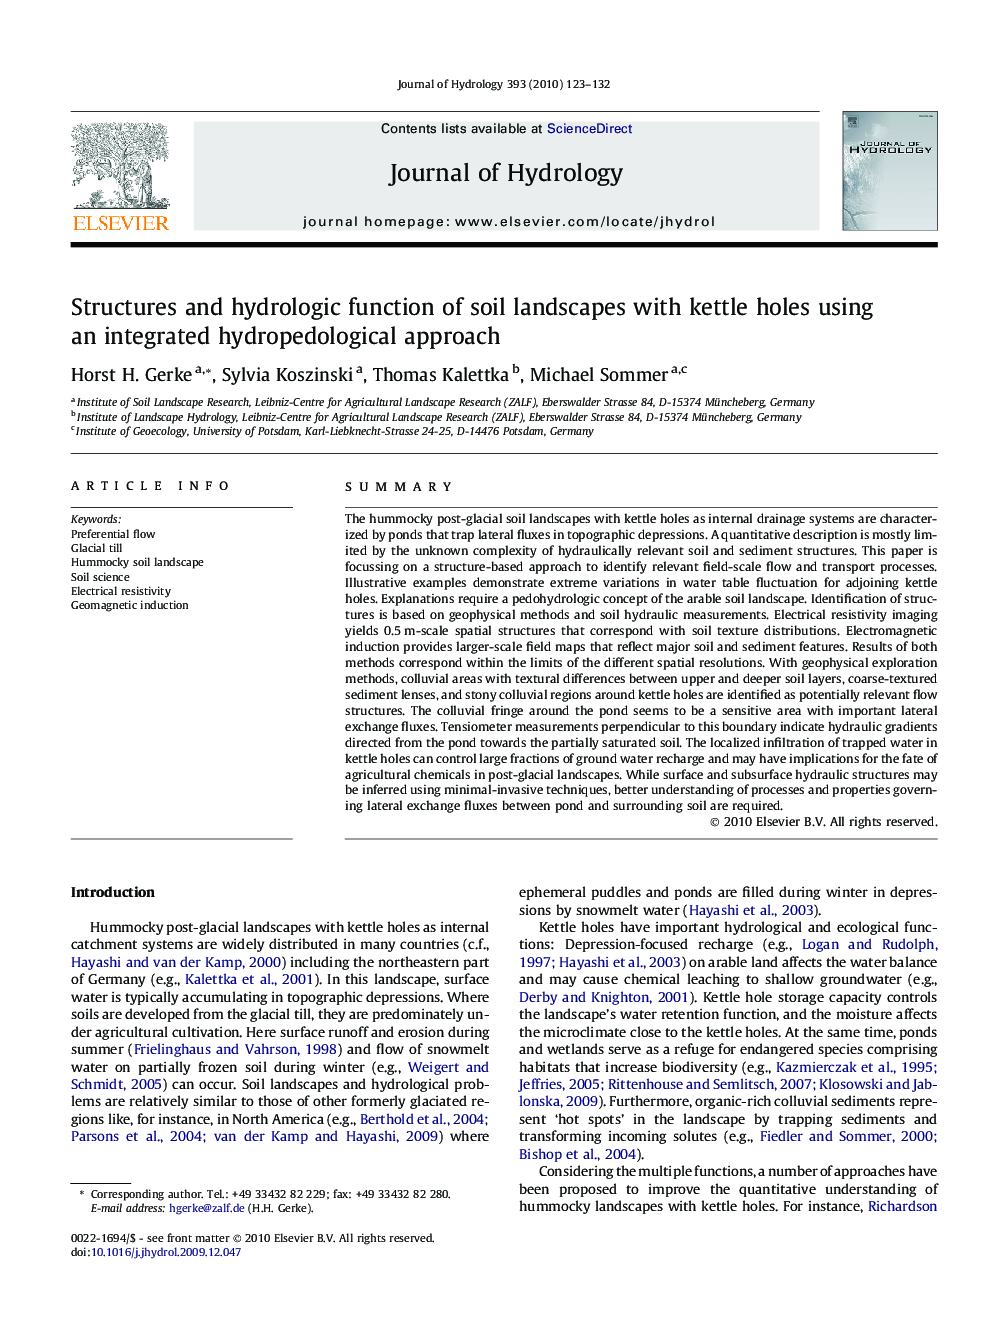 Structures and hydrologic function of soil landscapes with kettle holes using an integrated hydropedological approach